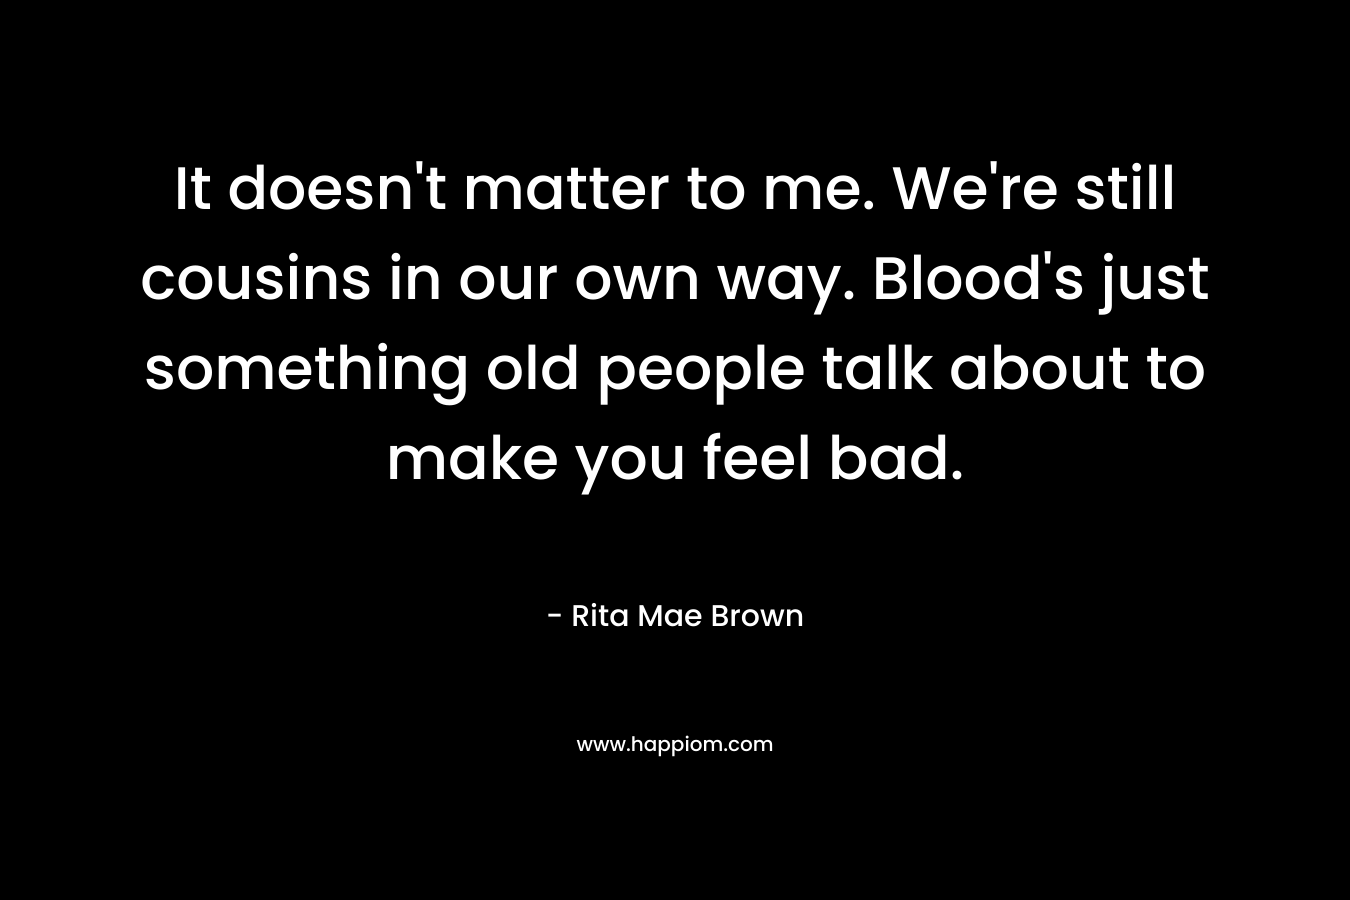 It doesn’t matter to me. We’re still cousins in our own way. Blood’s just something old people talk about to make you feel bad. – Rita Mae Brown